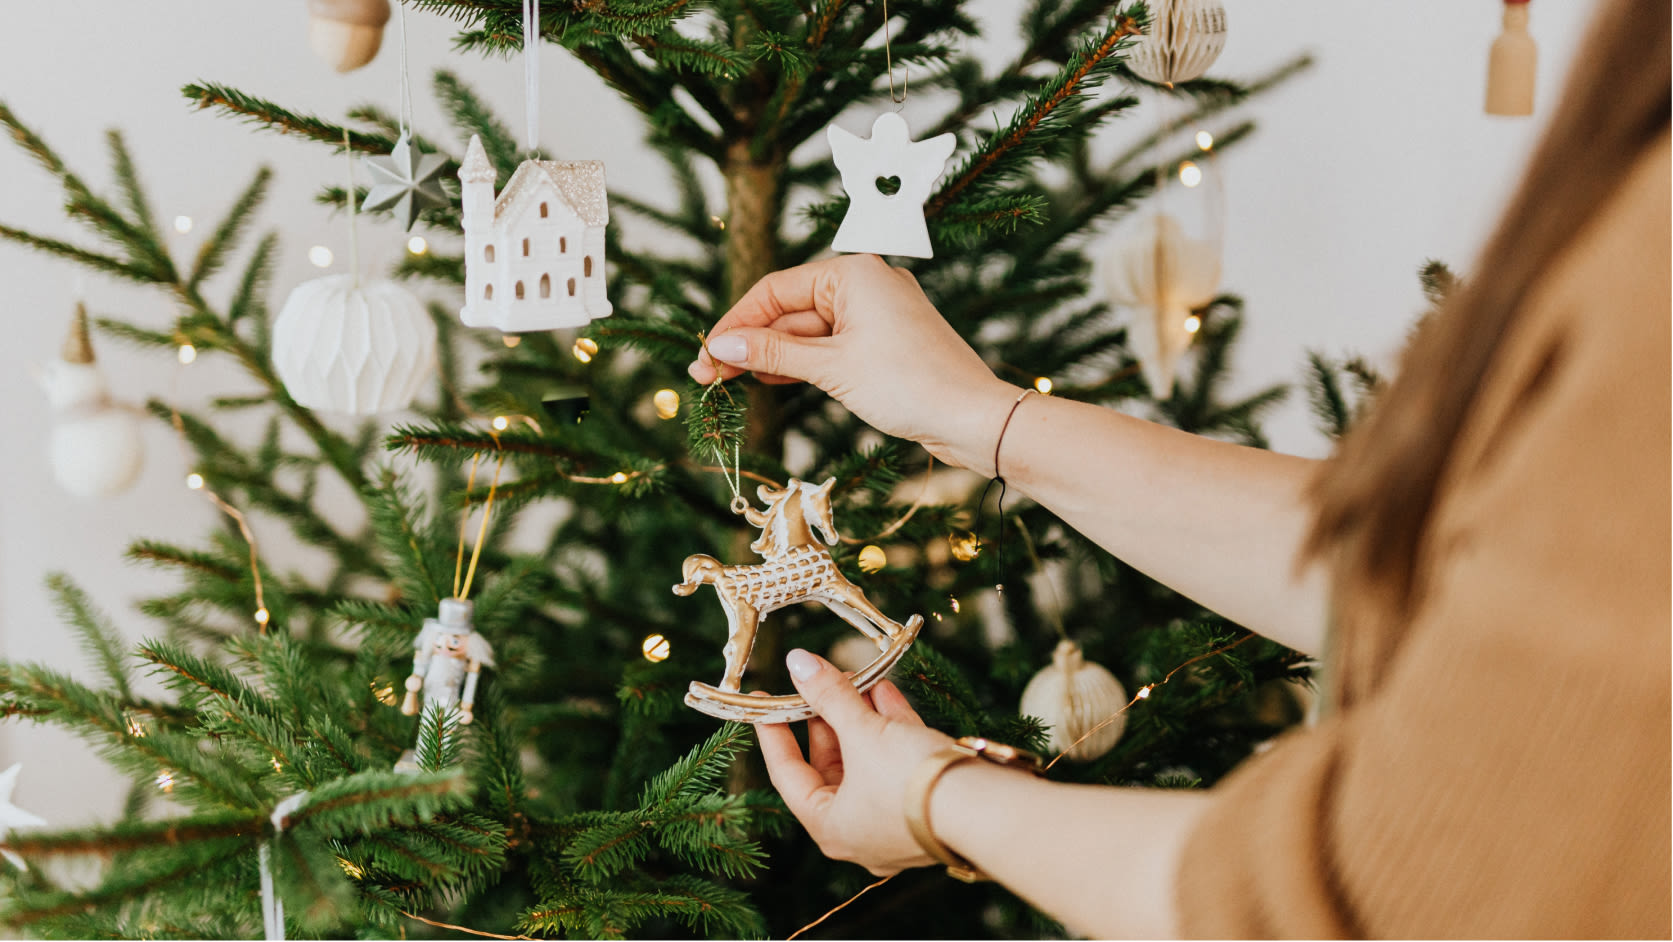 Woman adding a rocking horse ornament to her decorated Christmas tree